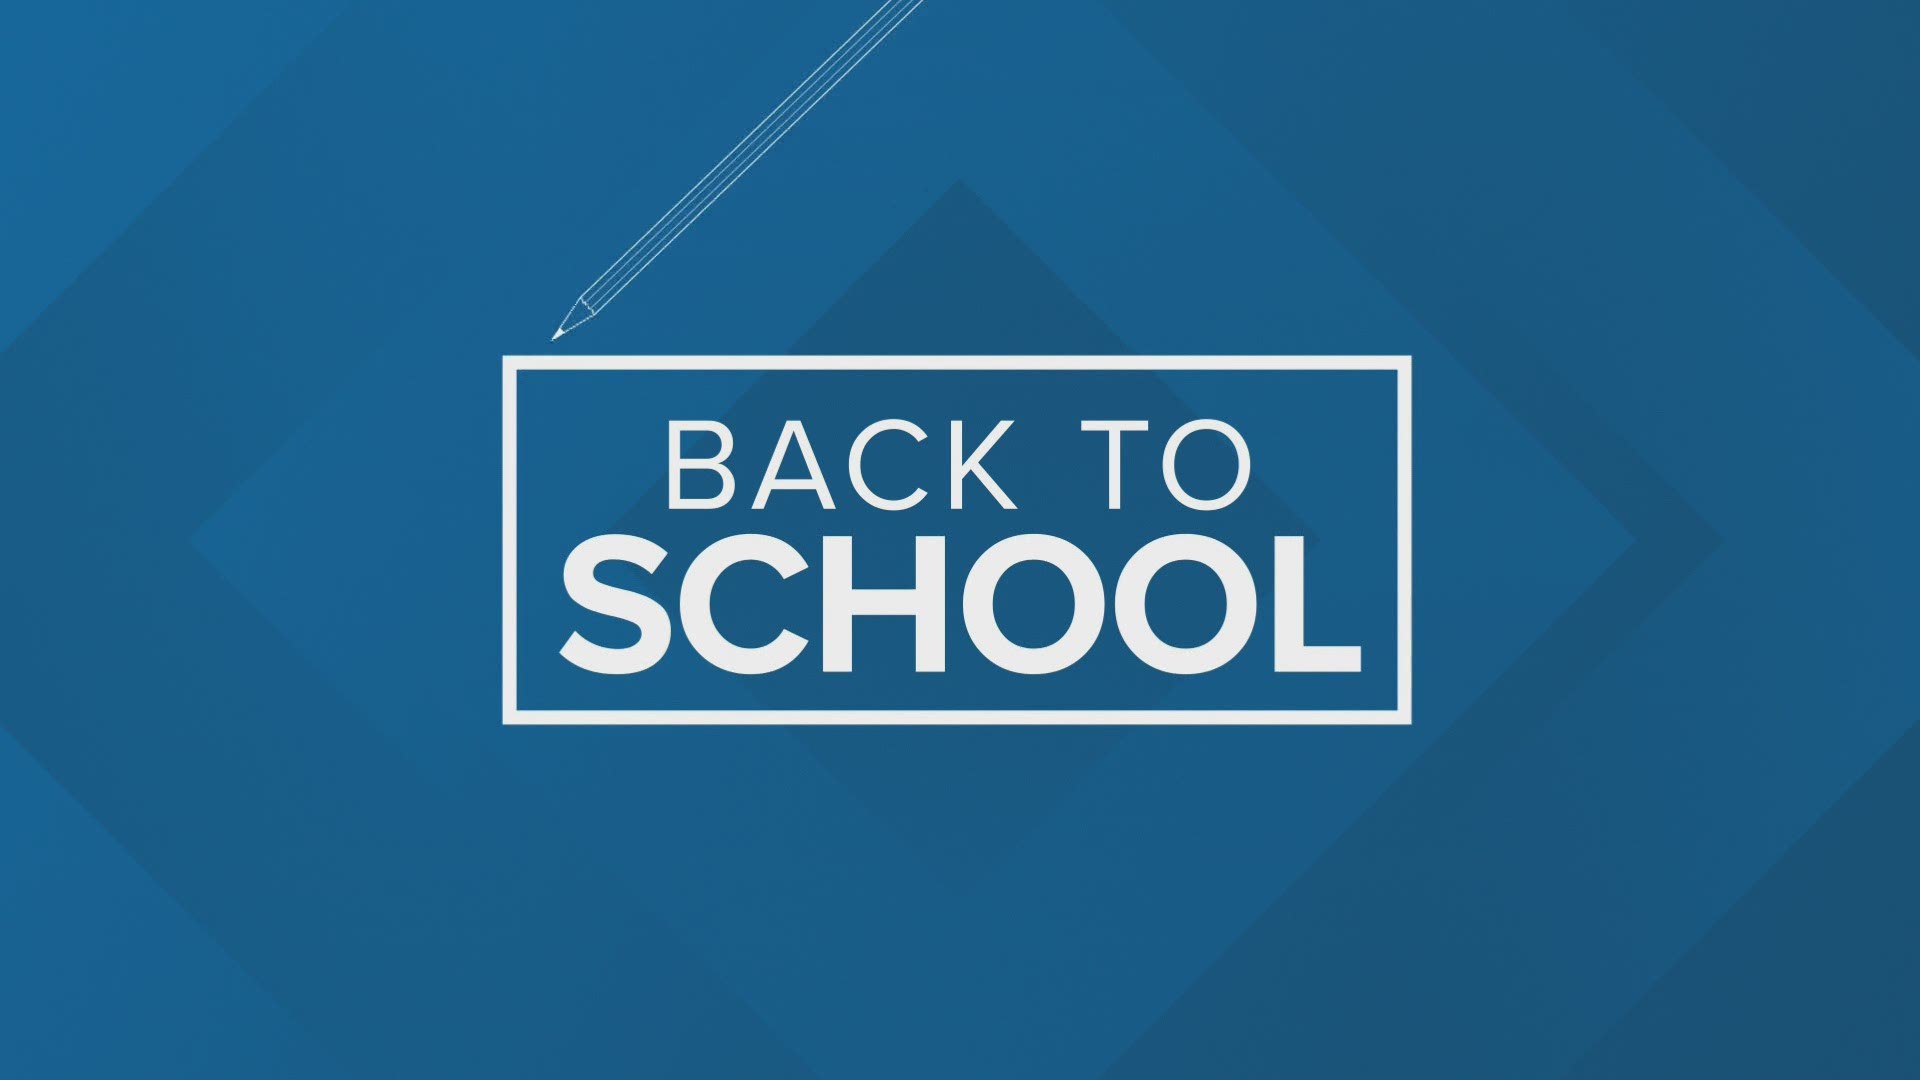 13News Education Expert Jennifer Brinker discusses back-to-school concerns with Dustin Grove.